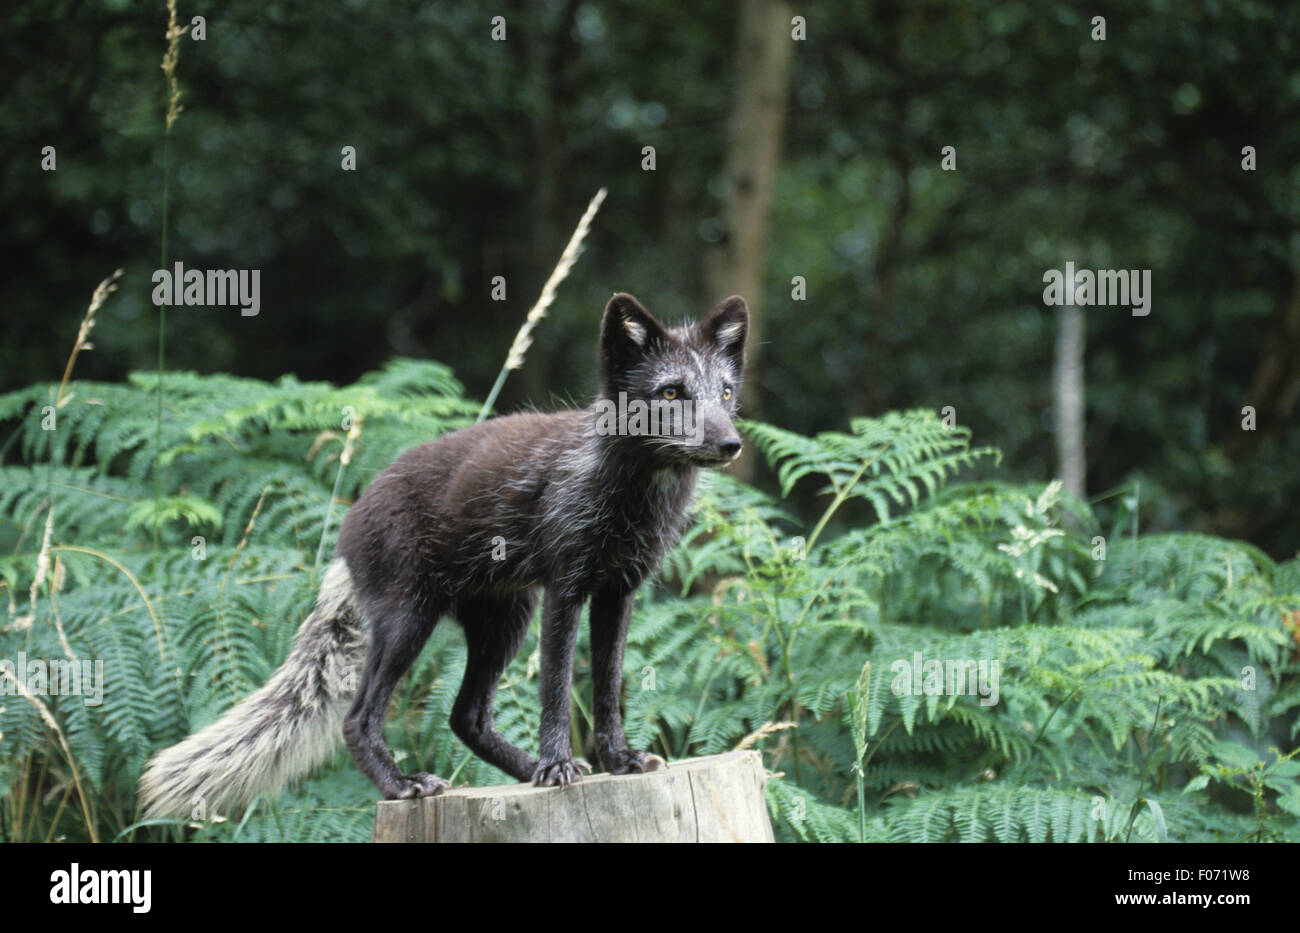 Arctic Fox captive taken in profile looking right standing on old tree stump Stock Photo